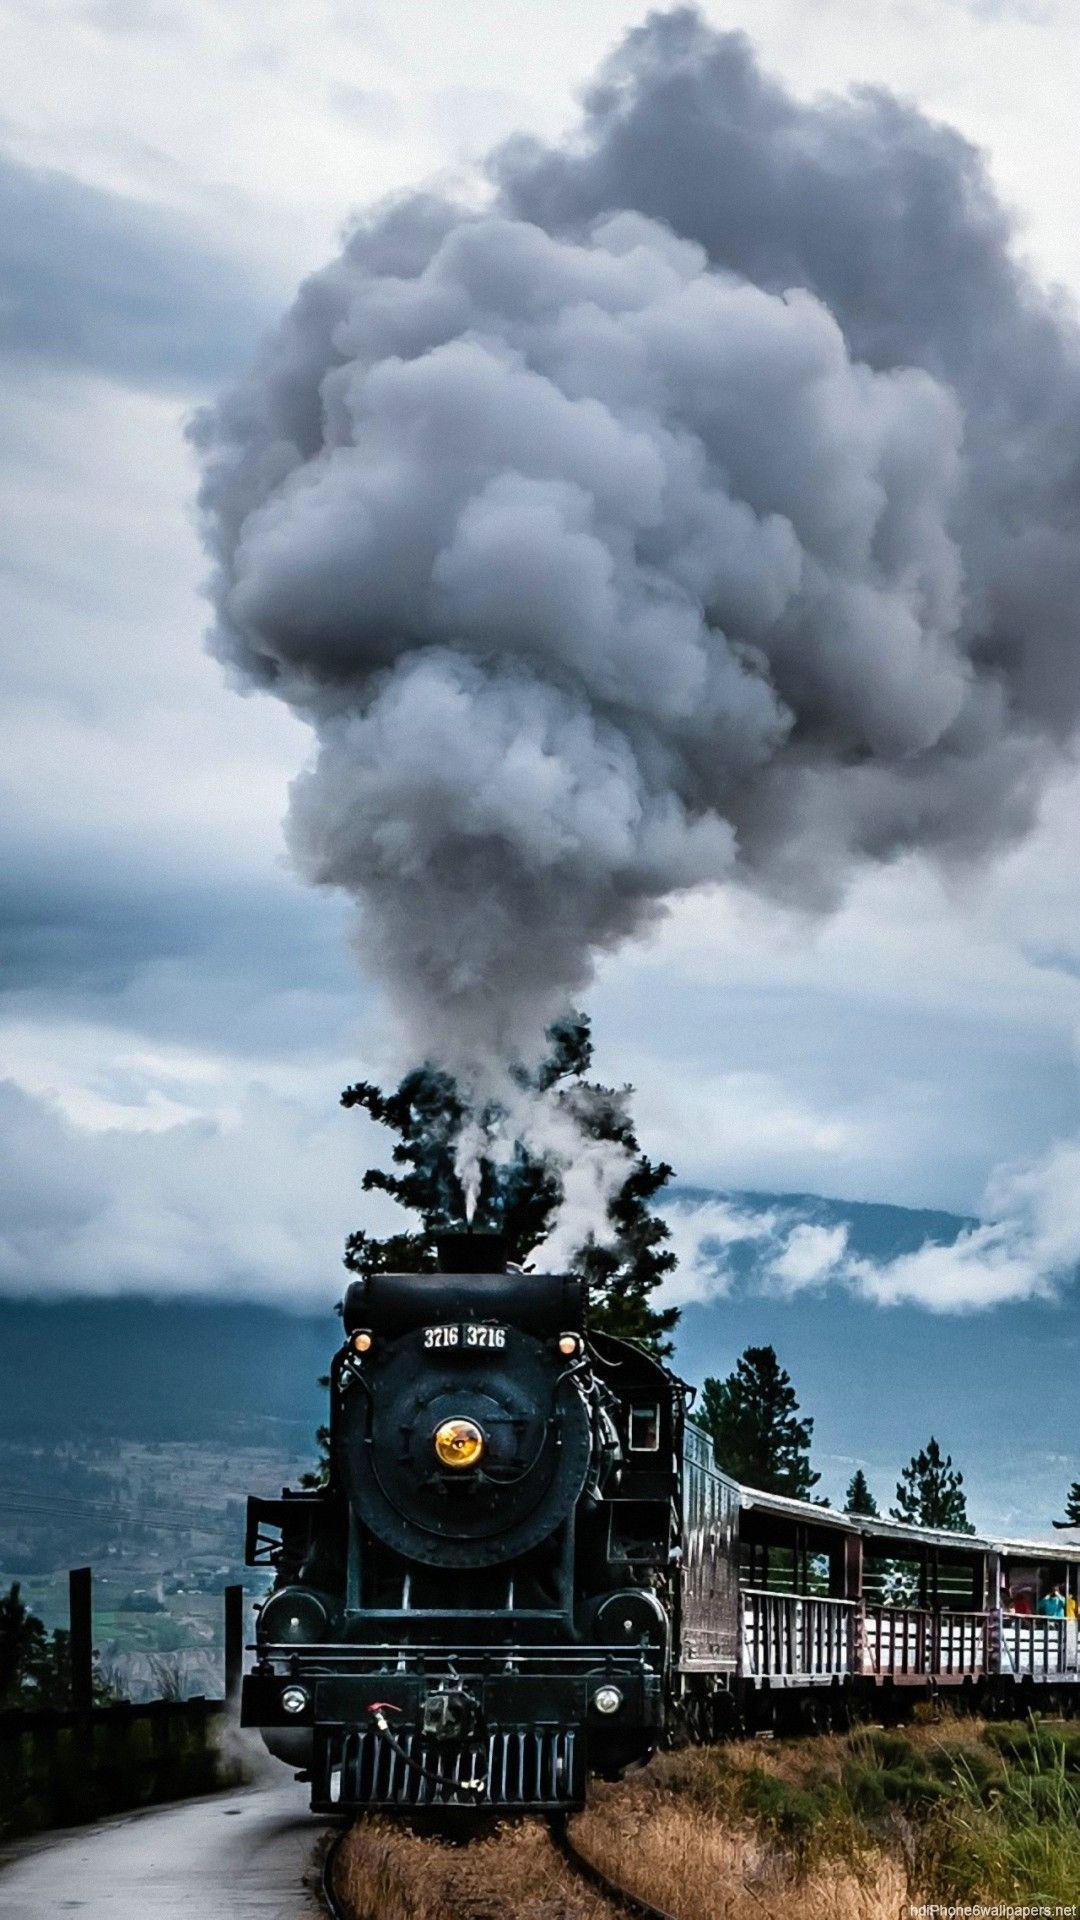 Trains Android Wallpapers - Wallpaper Cave